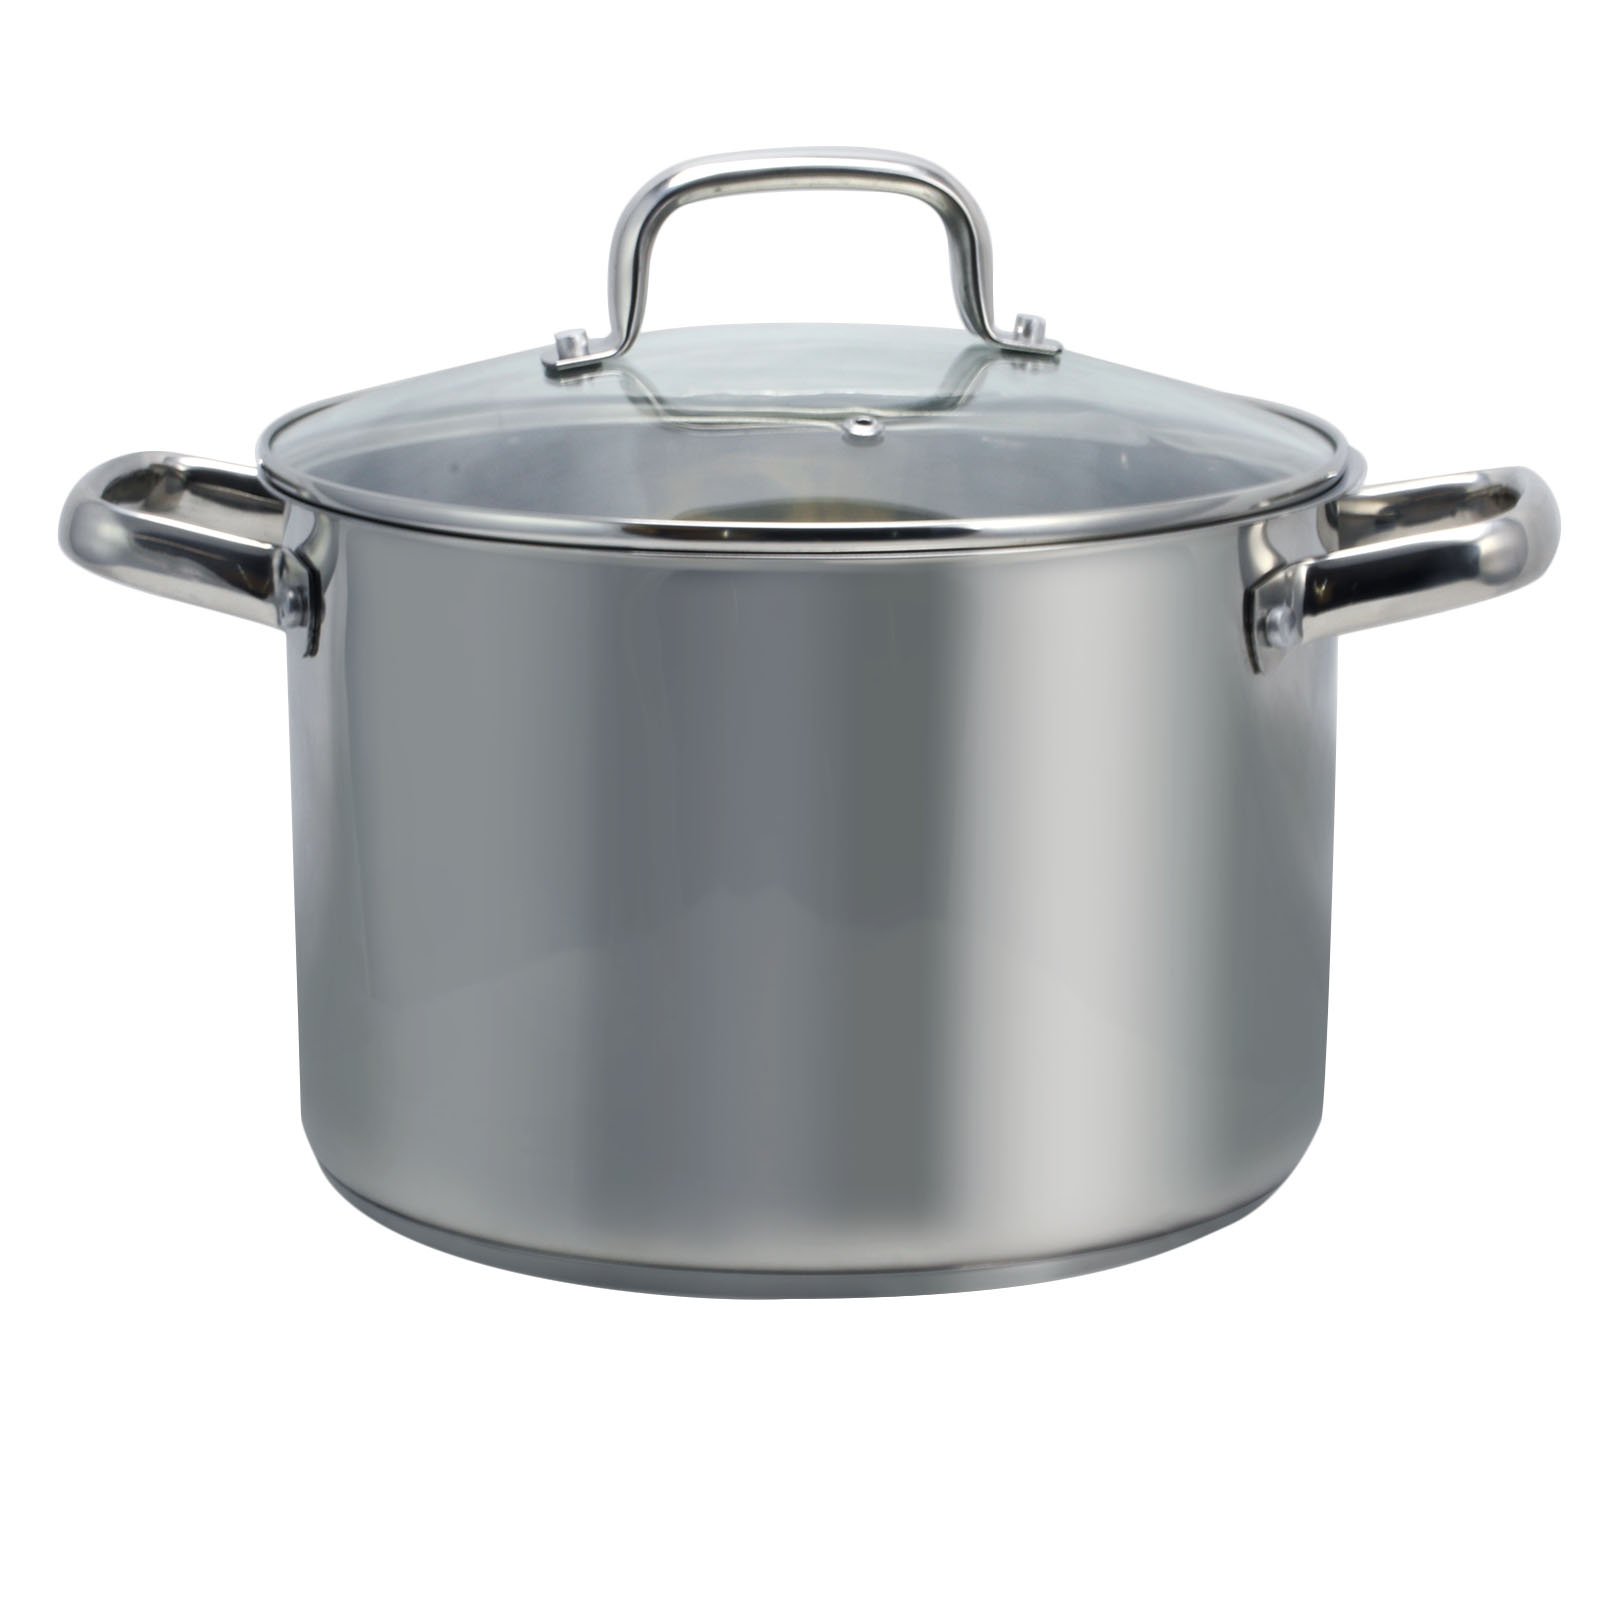 Oster Adenmore 8 Quart Stock Pot with Tempered Glass Lid